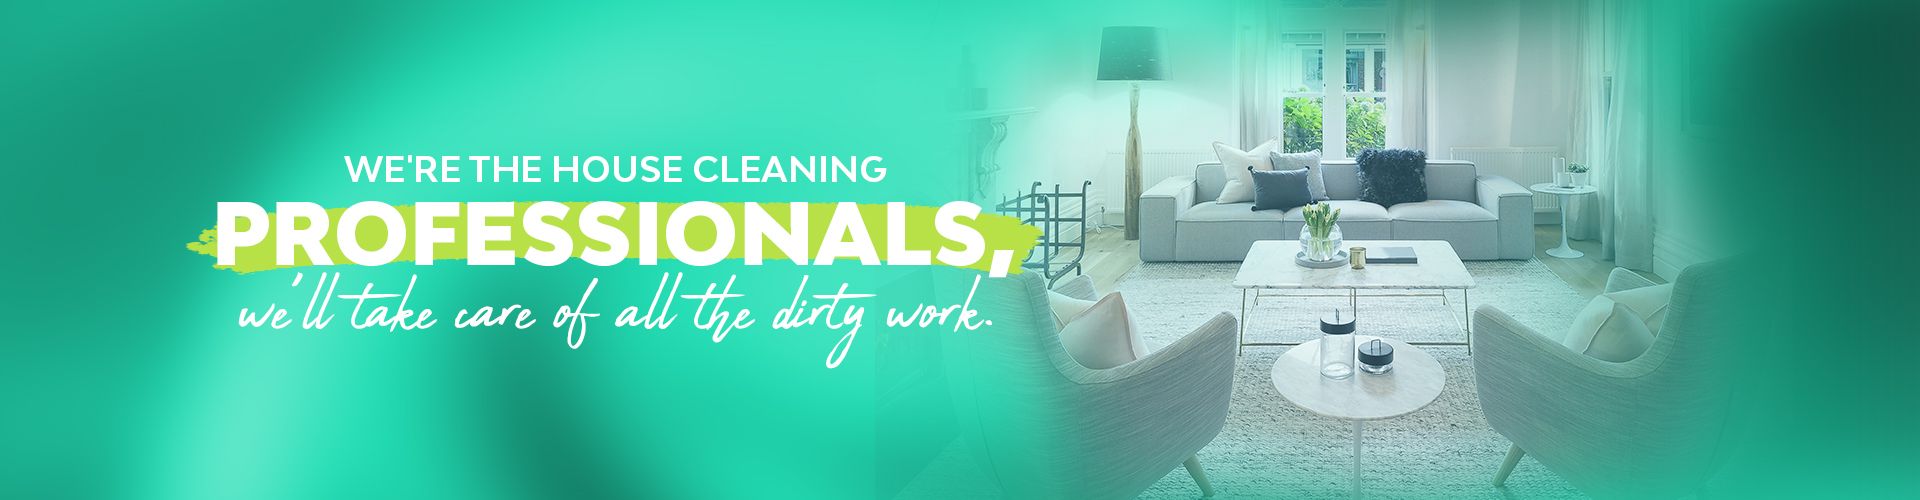 House Cleaning Service Howard CO MD